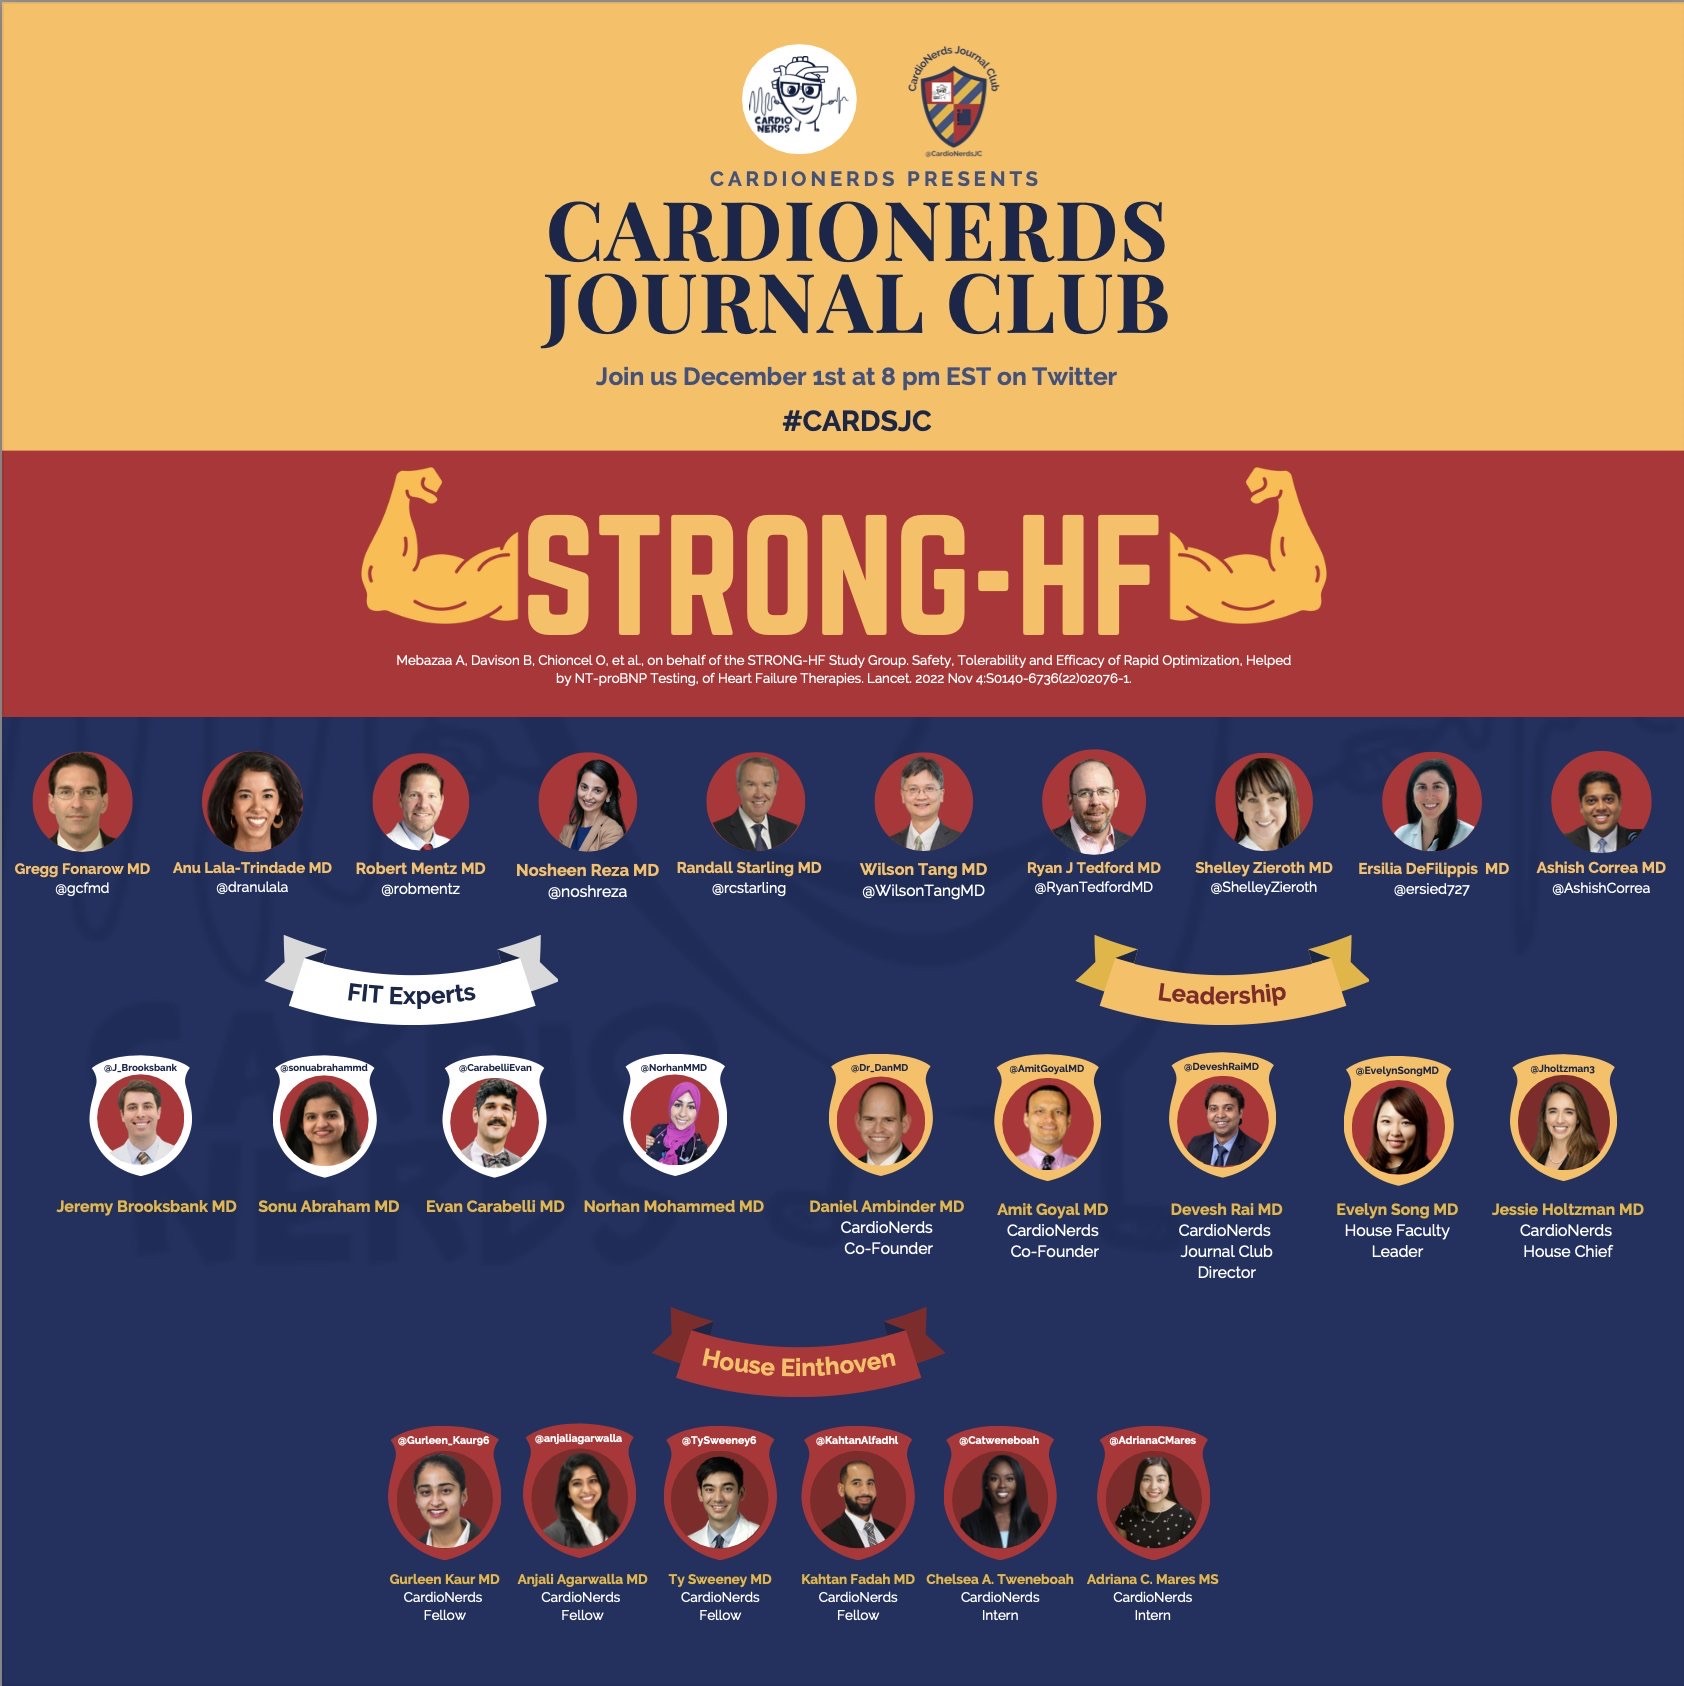 Cardioners Journal Club Poster: Strong-HF 